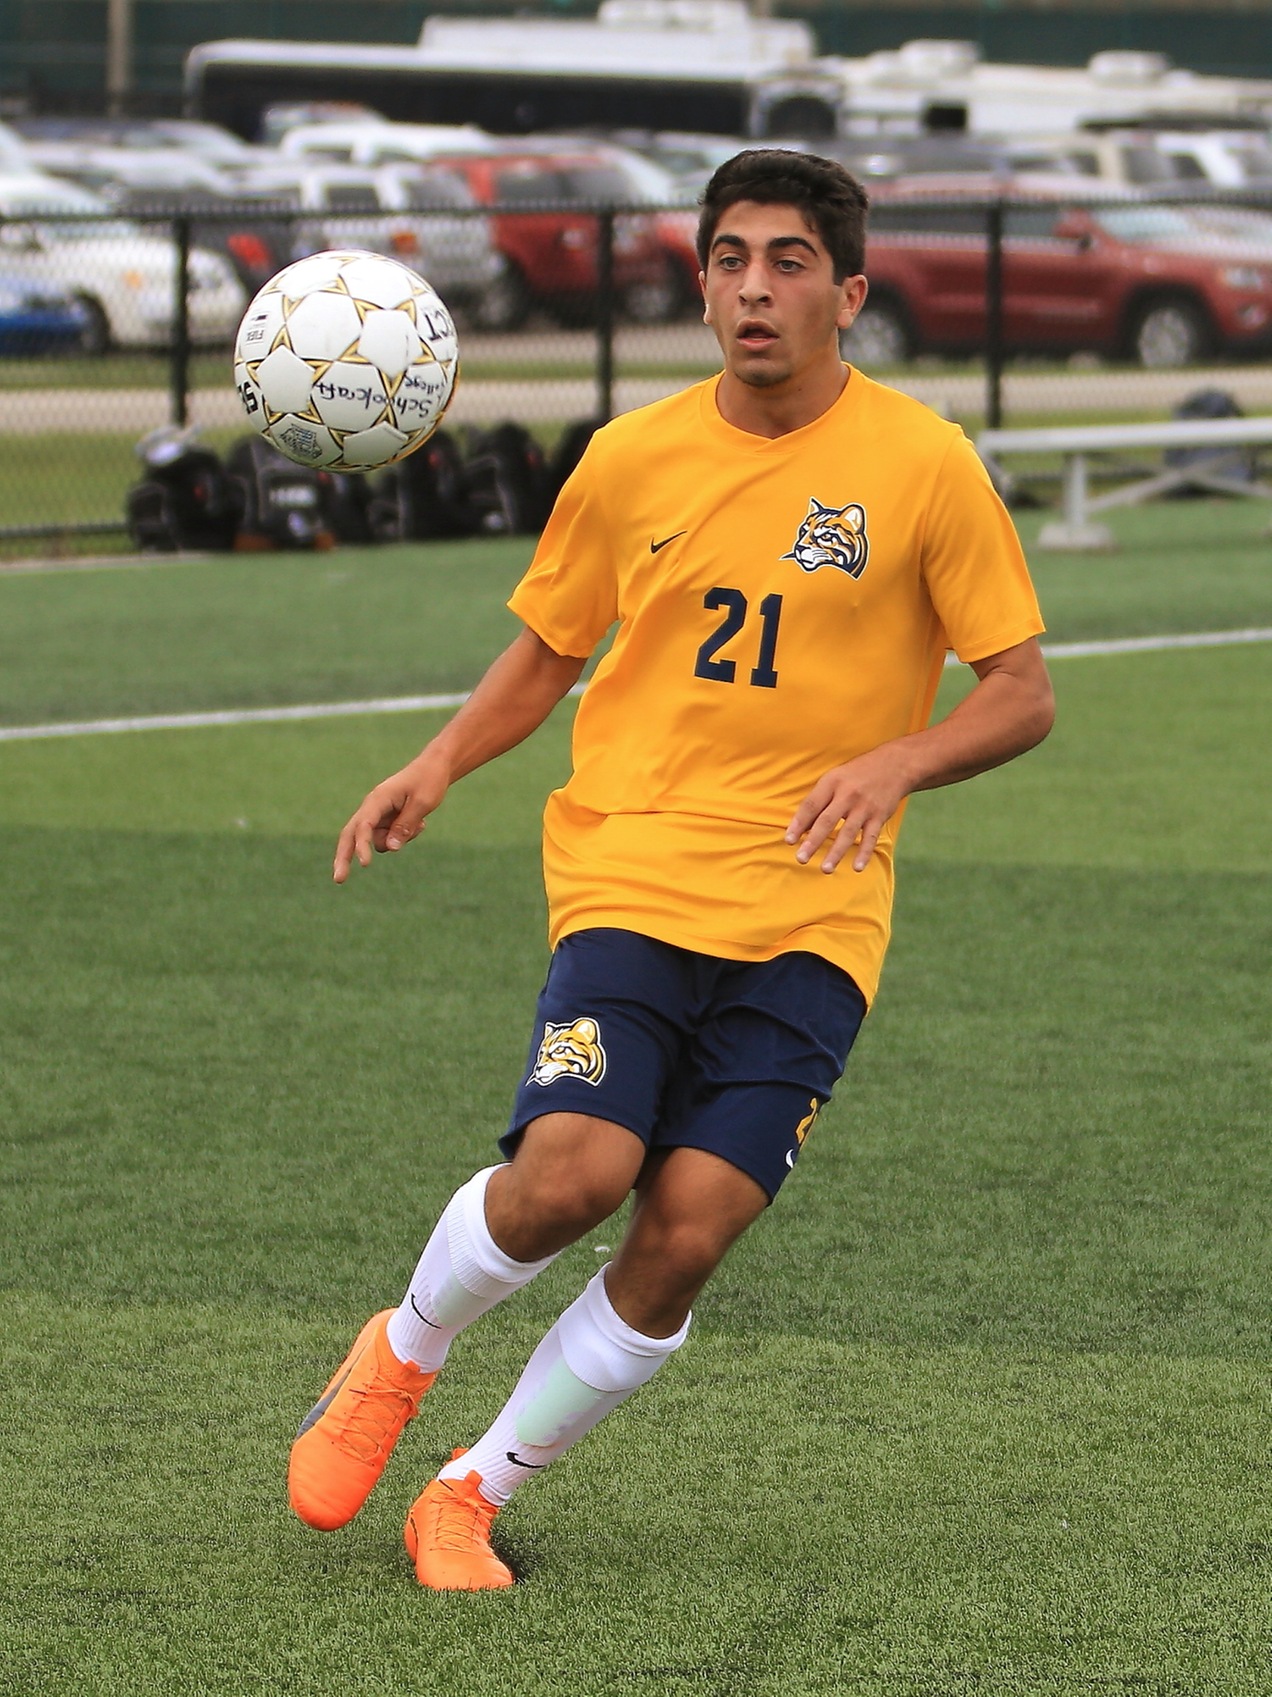 Schoolcraft College's Alexander Dalou plays the ball in a recent match
Photo: Schoolcraft College